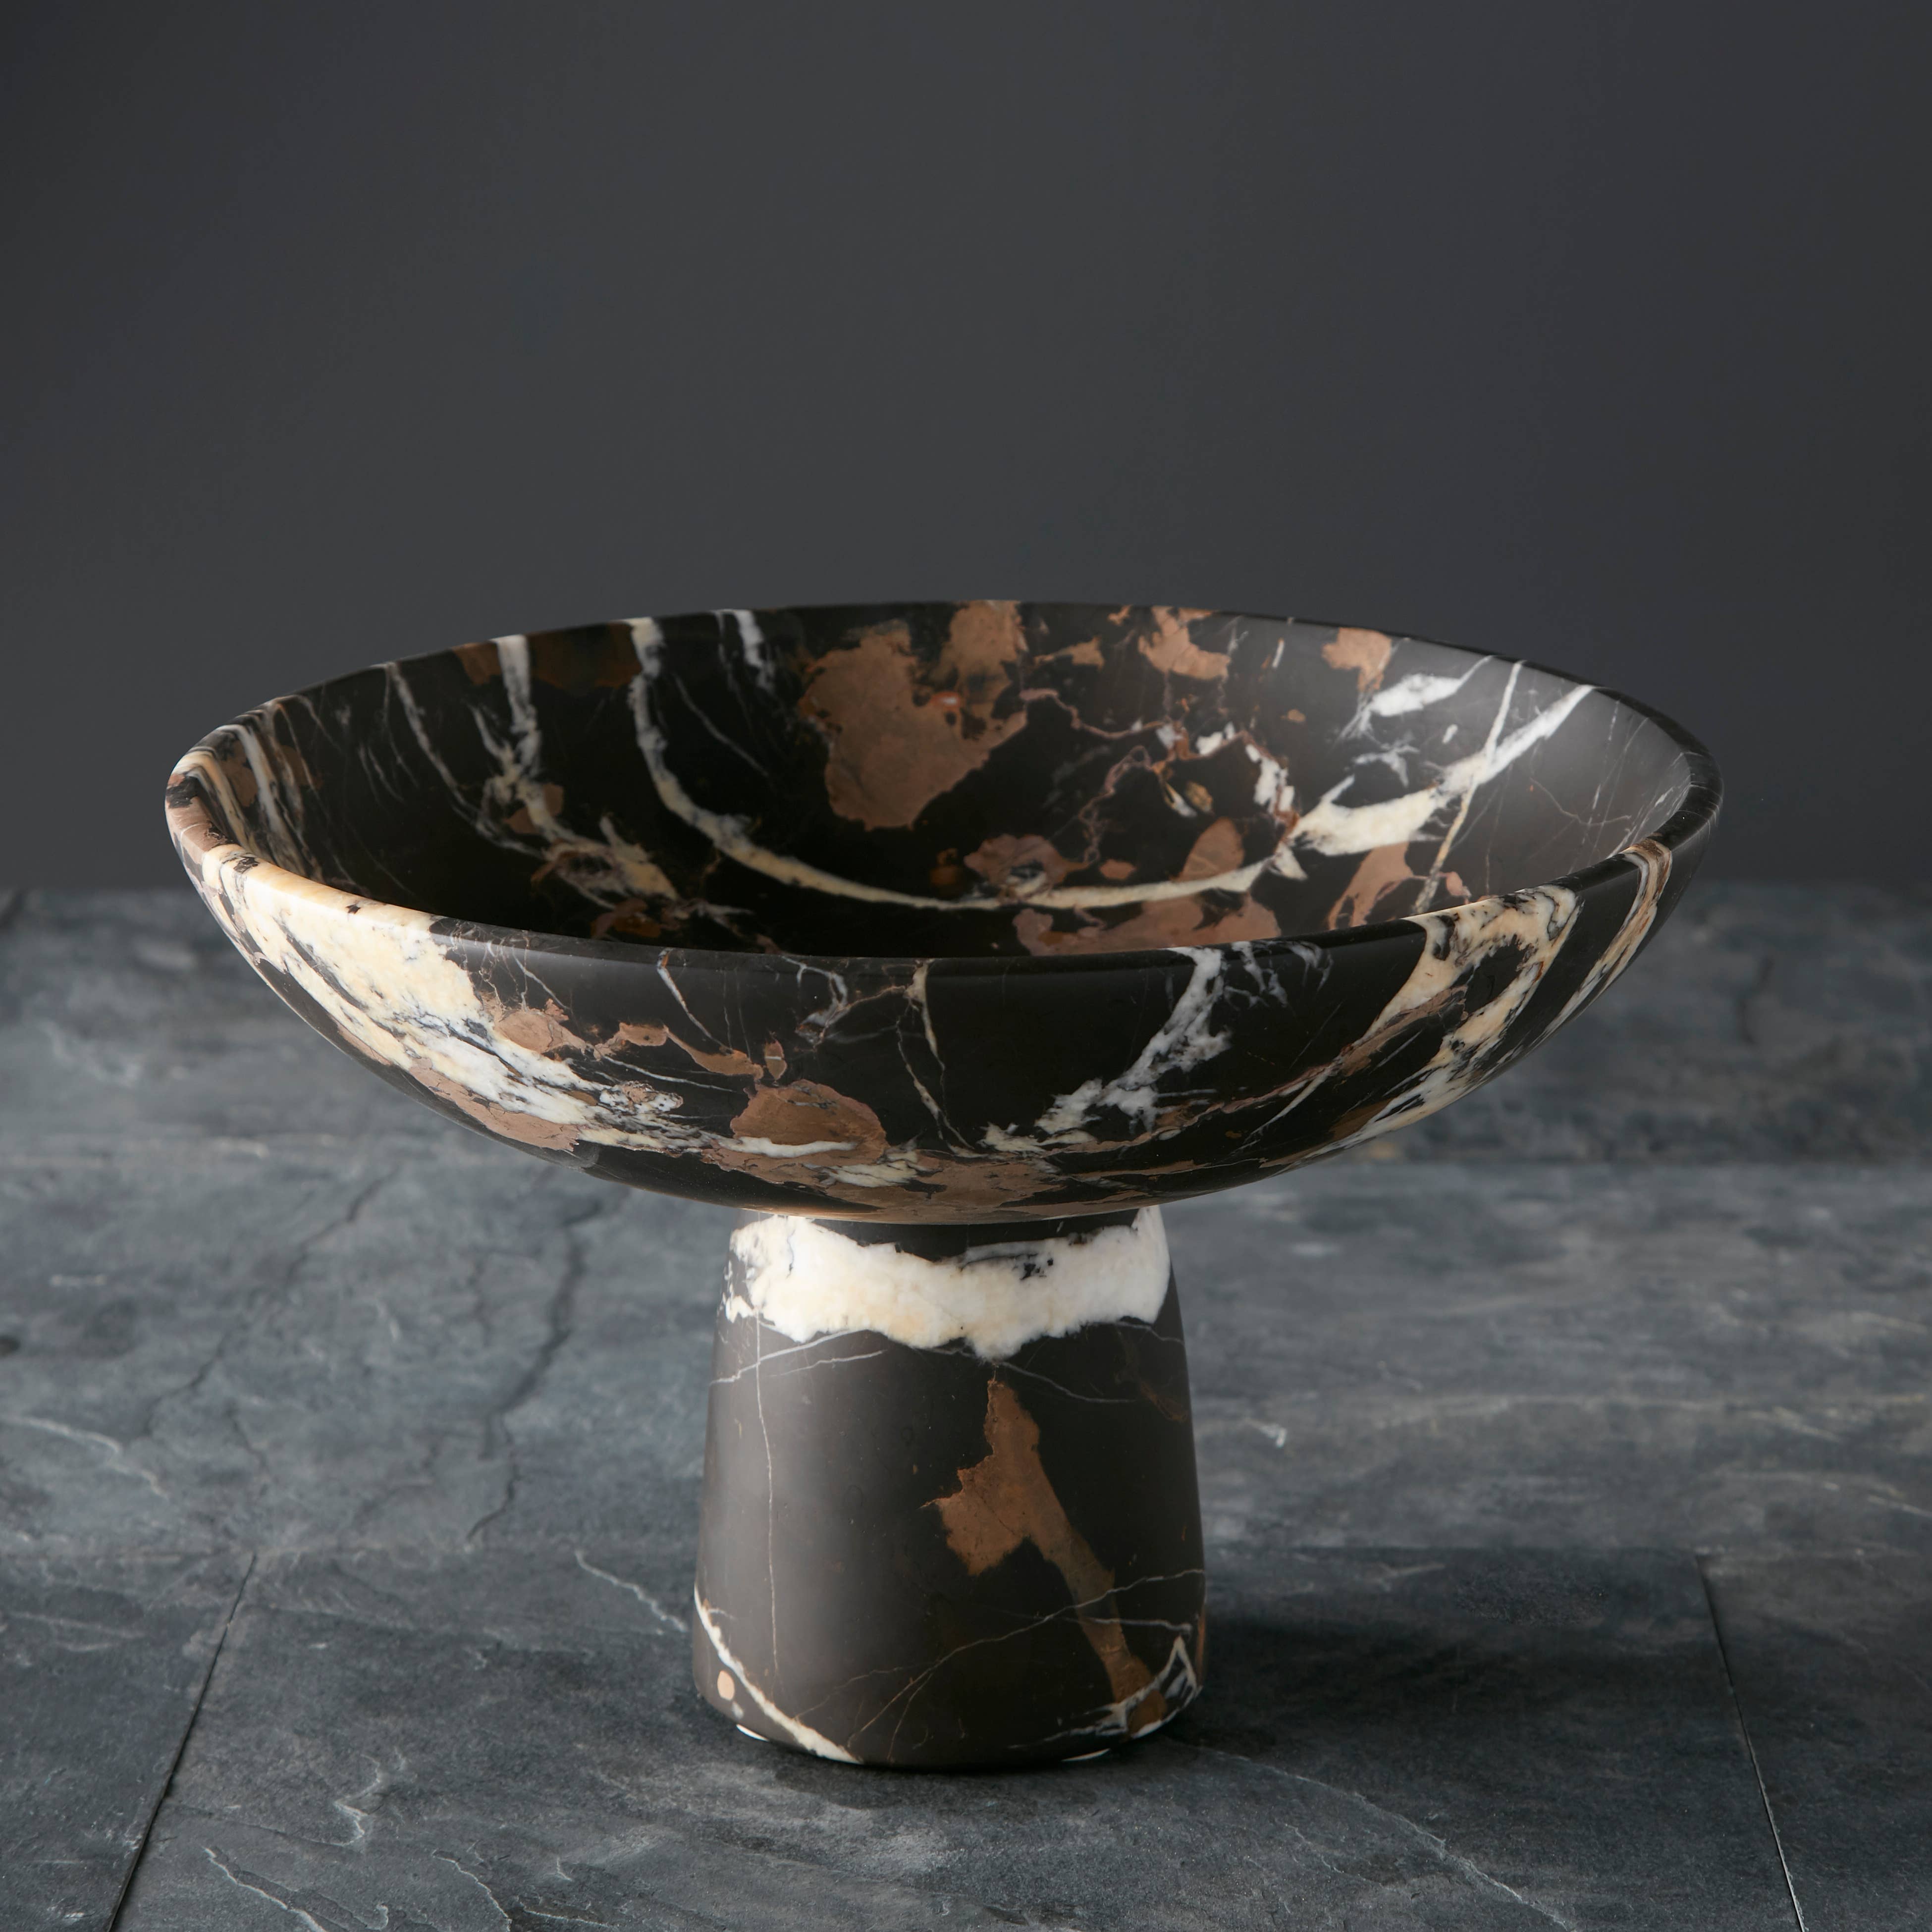 Rhea Collection 12" Black and Gold Marble Honed Finish